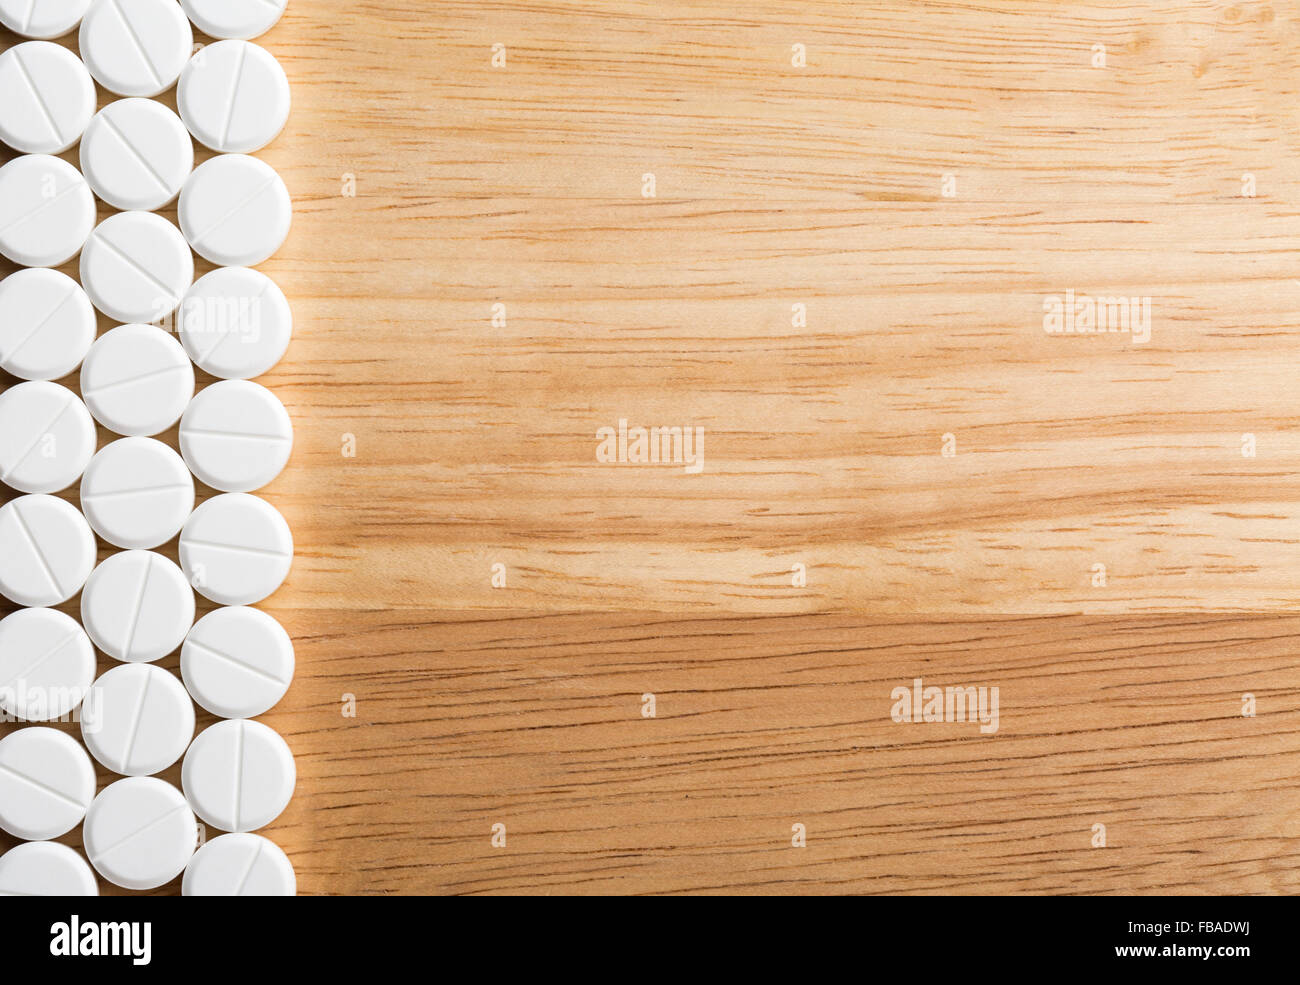 Border from white pills on a wooden background.Top view Stock Photo